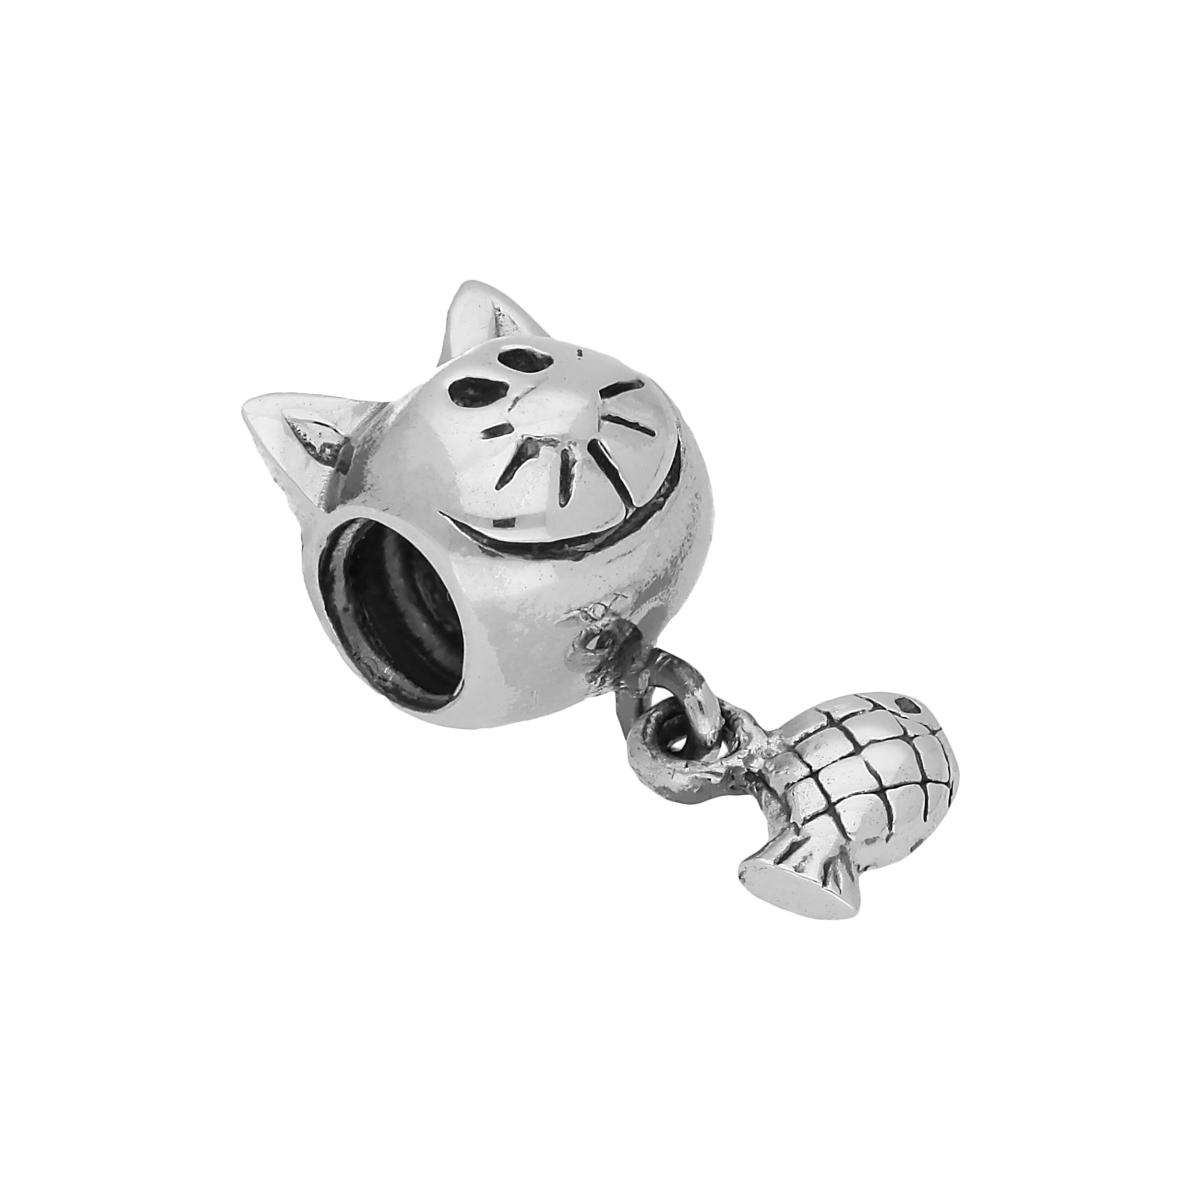 Best Quality Solid Sterling Silver Handmade Charm |Design Cat & Fish Hanging Bead Charm|